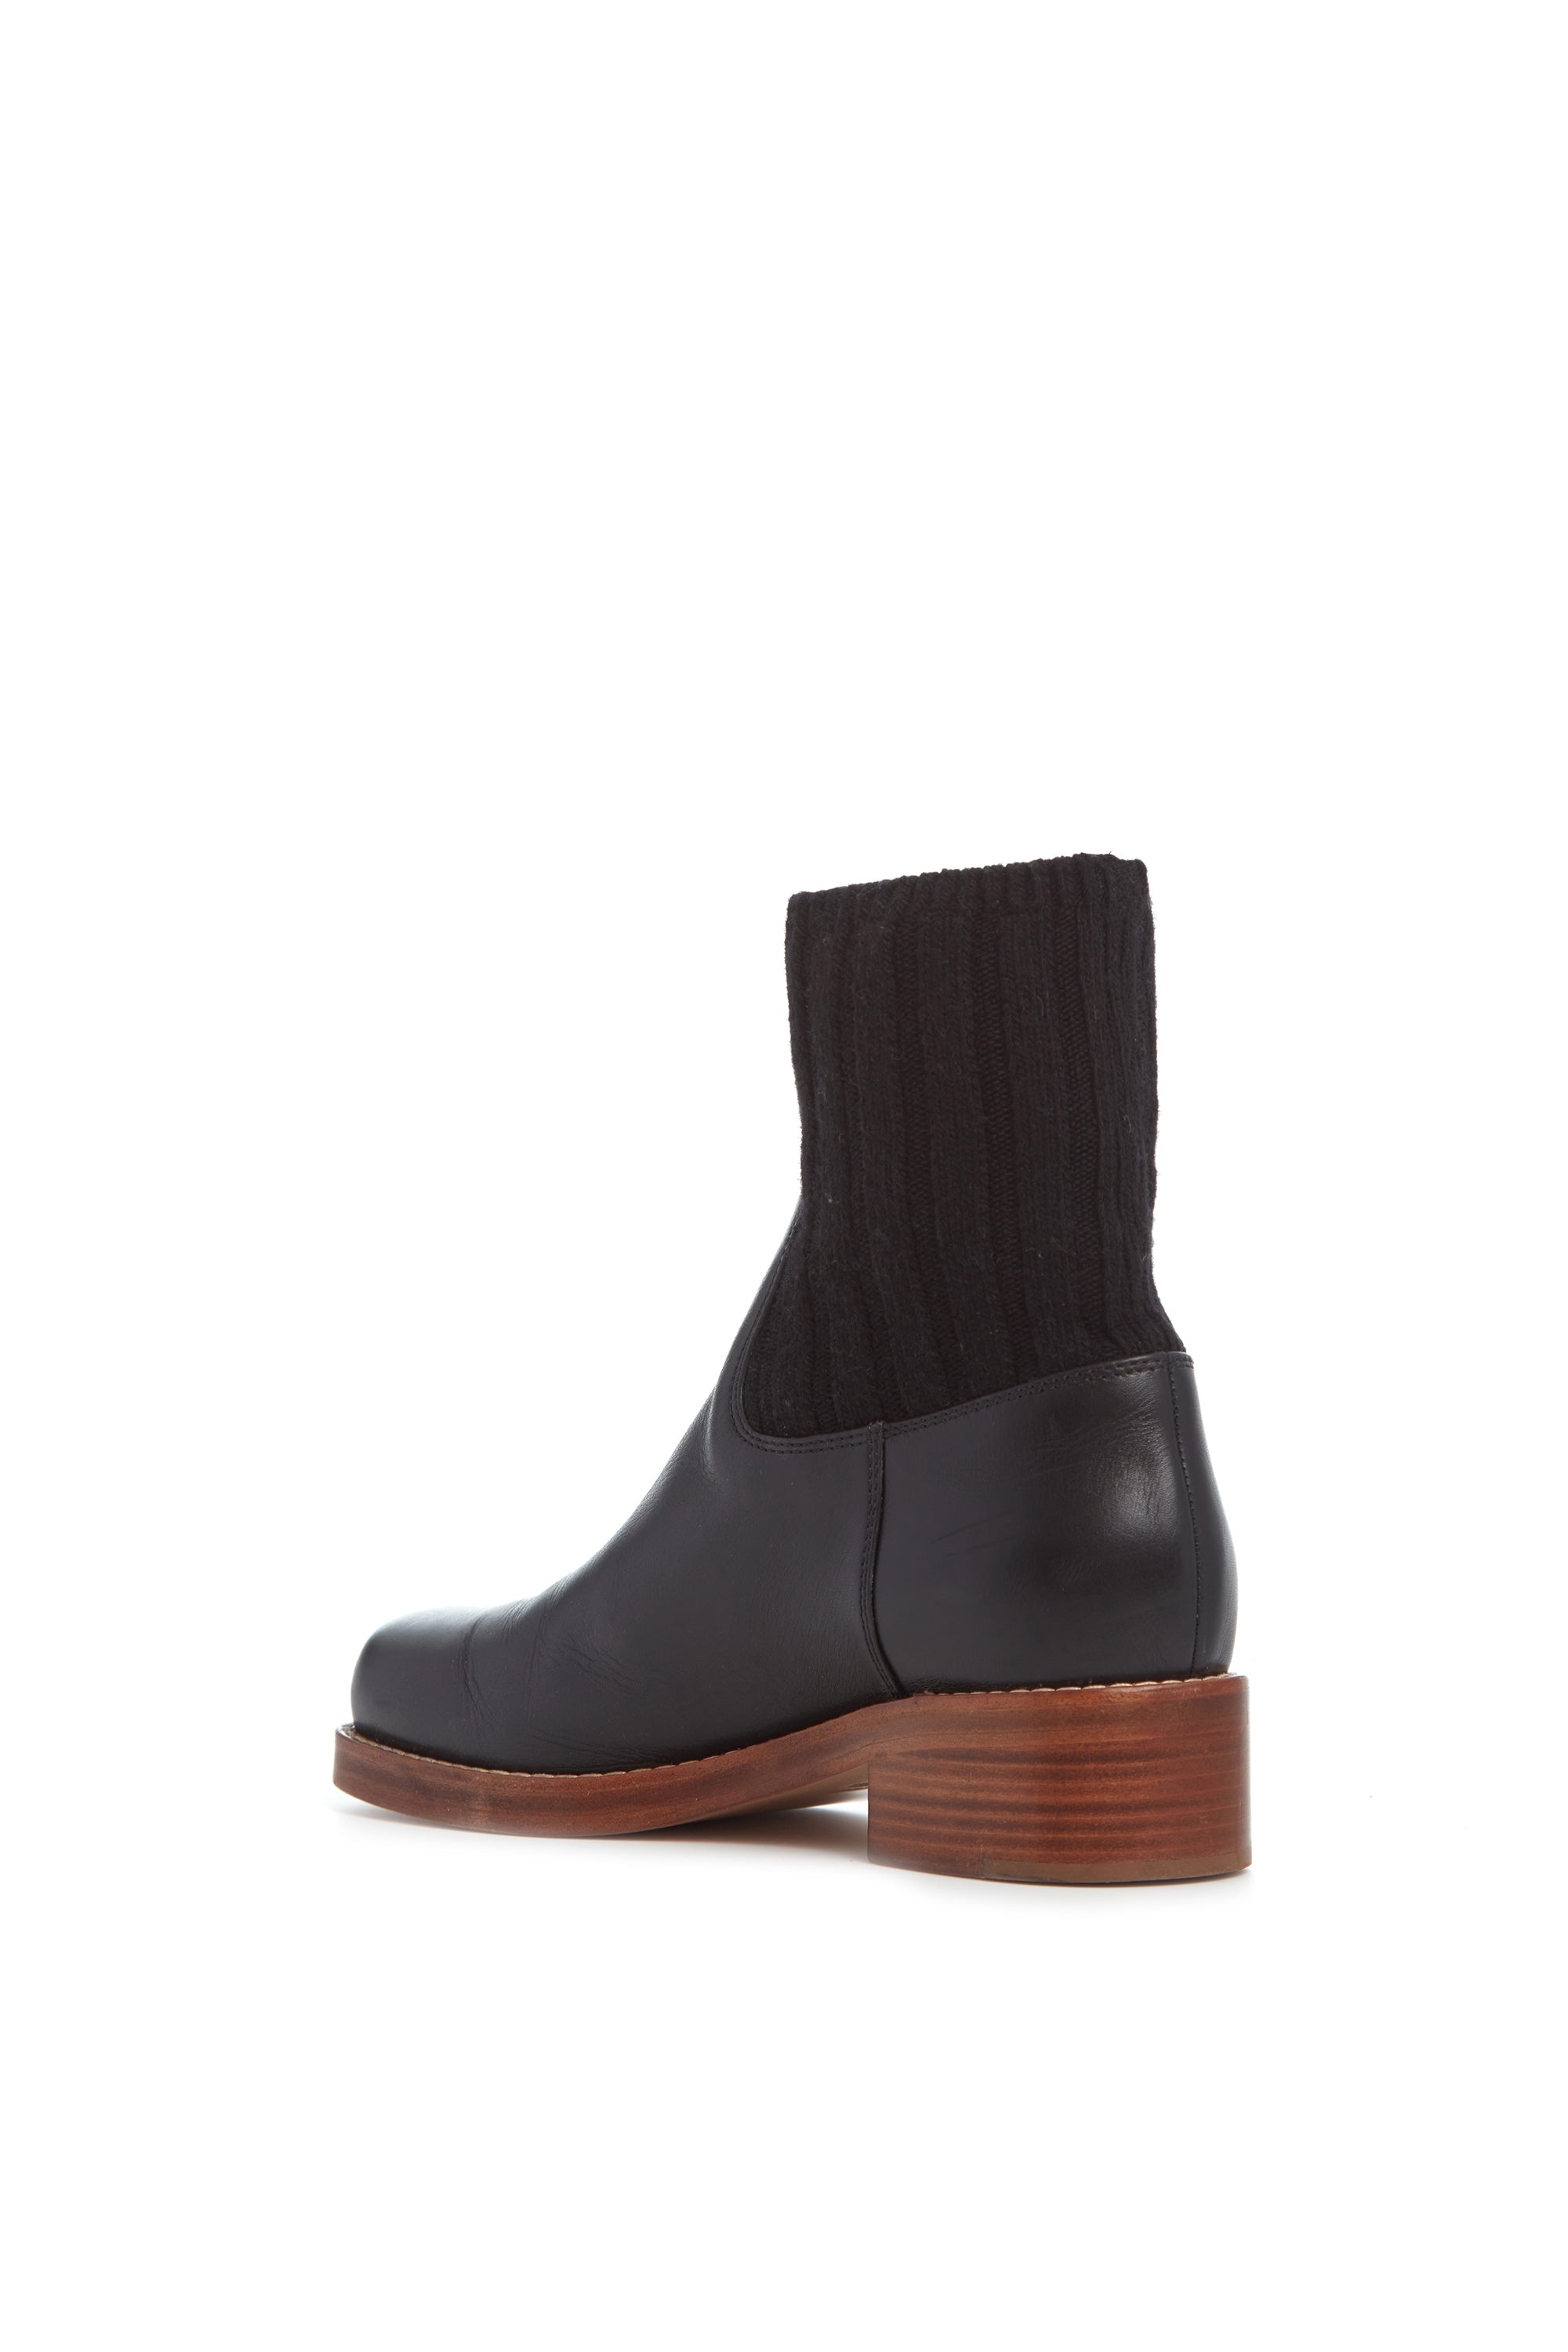 Hobbes Sock Boot in Black Leather & Cashmere - 3